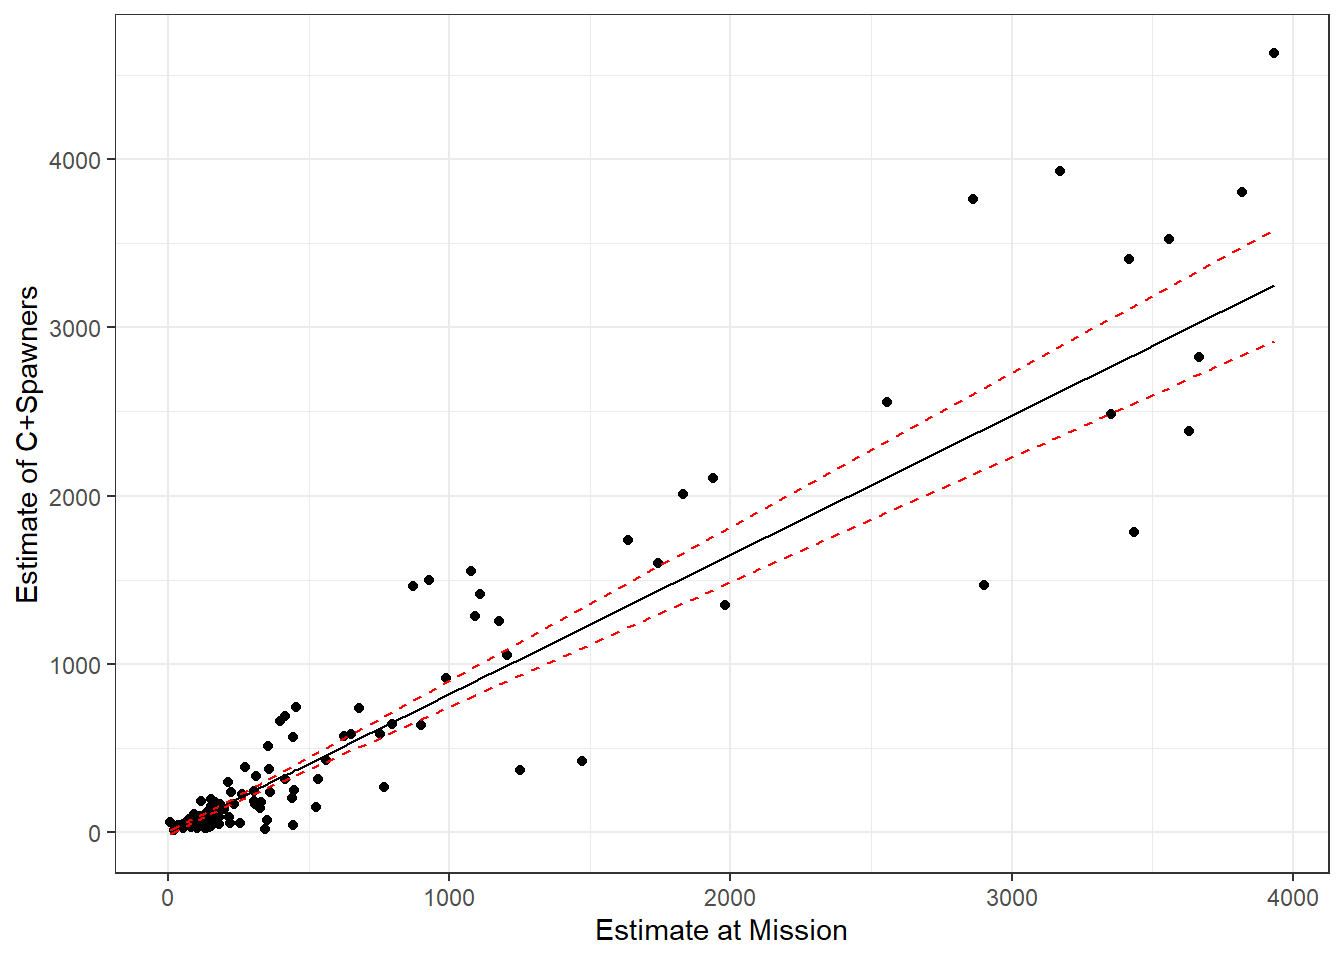 Predictions for the catch and spawning escapement based on the count of sockeye salmon at Mission. A 95% confidence interval for the mean is given by the red dotted lines.